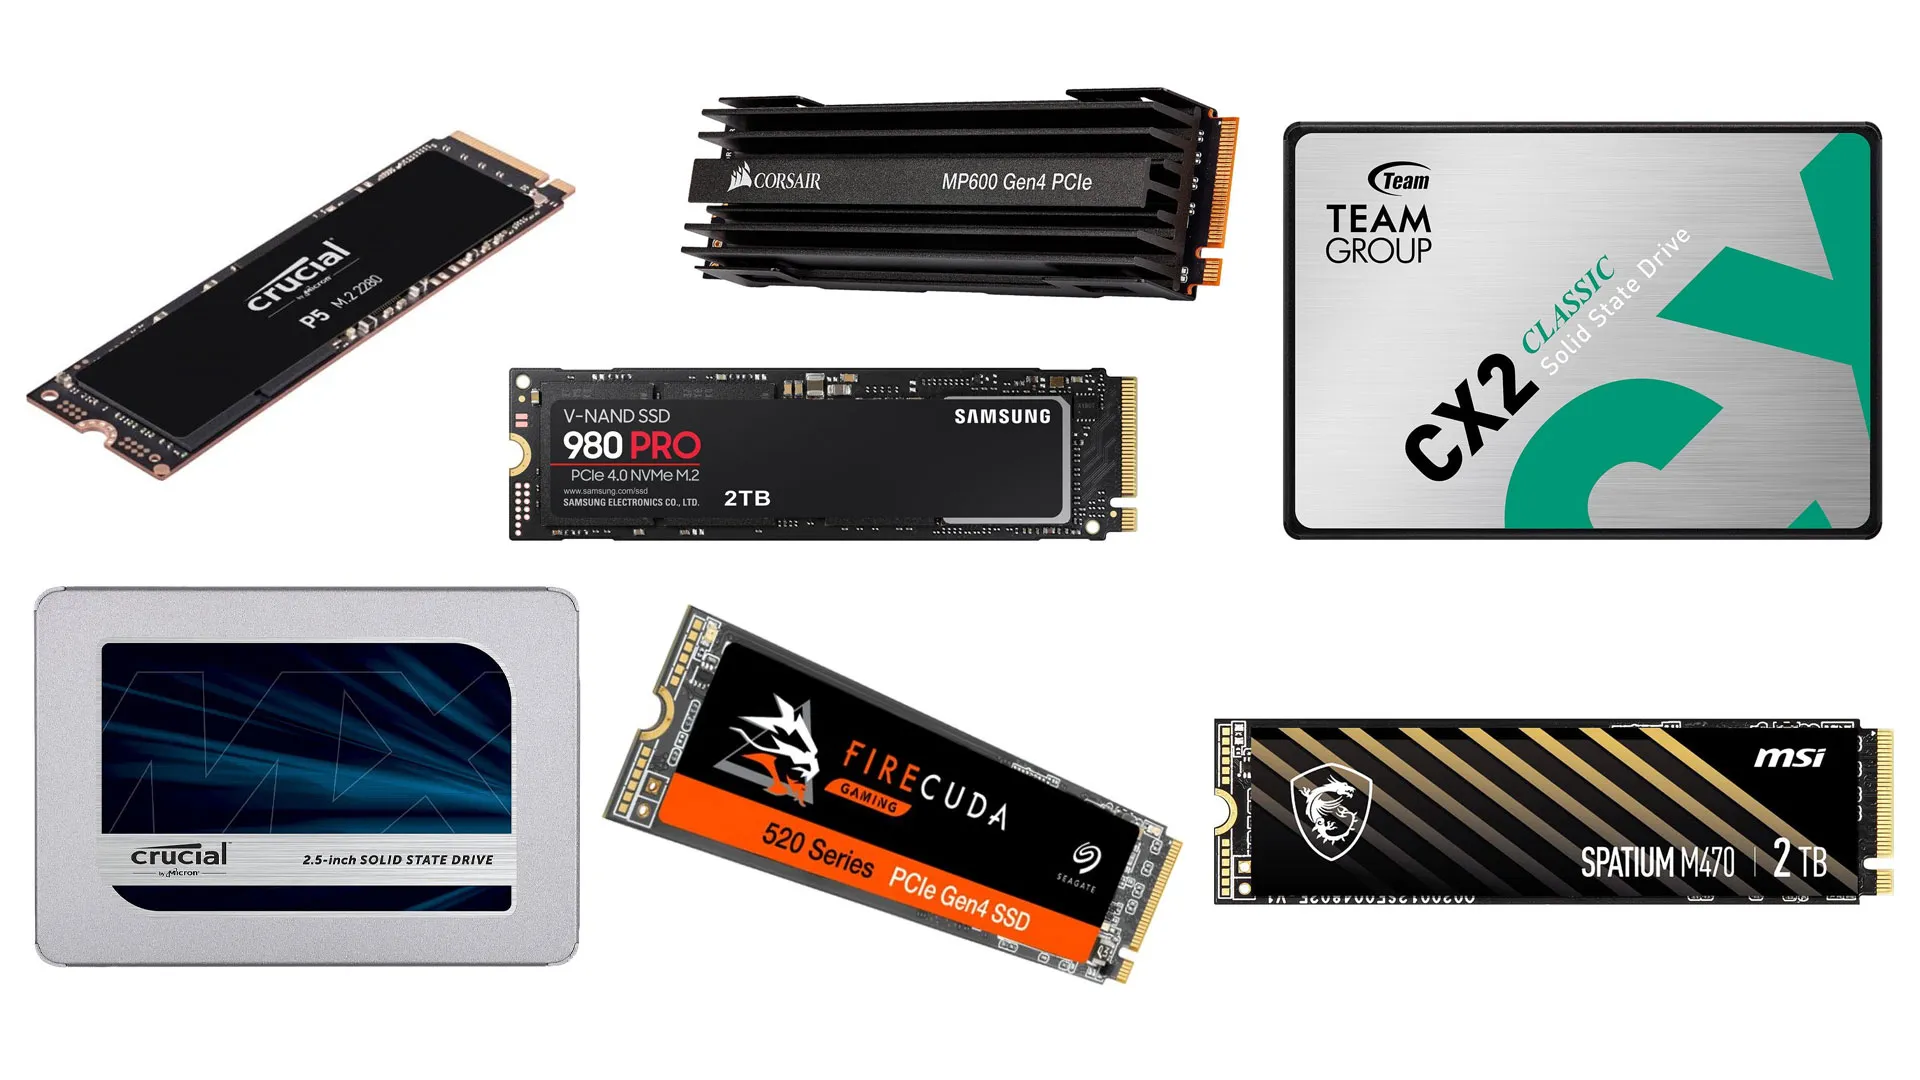 Best SSD deals for PC gaming this Black Monday week